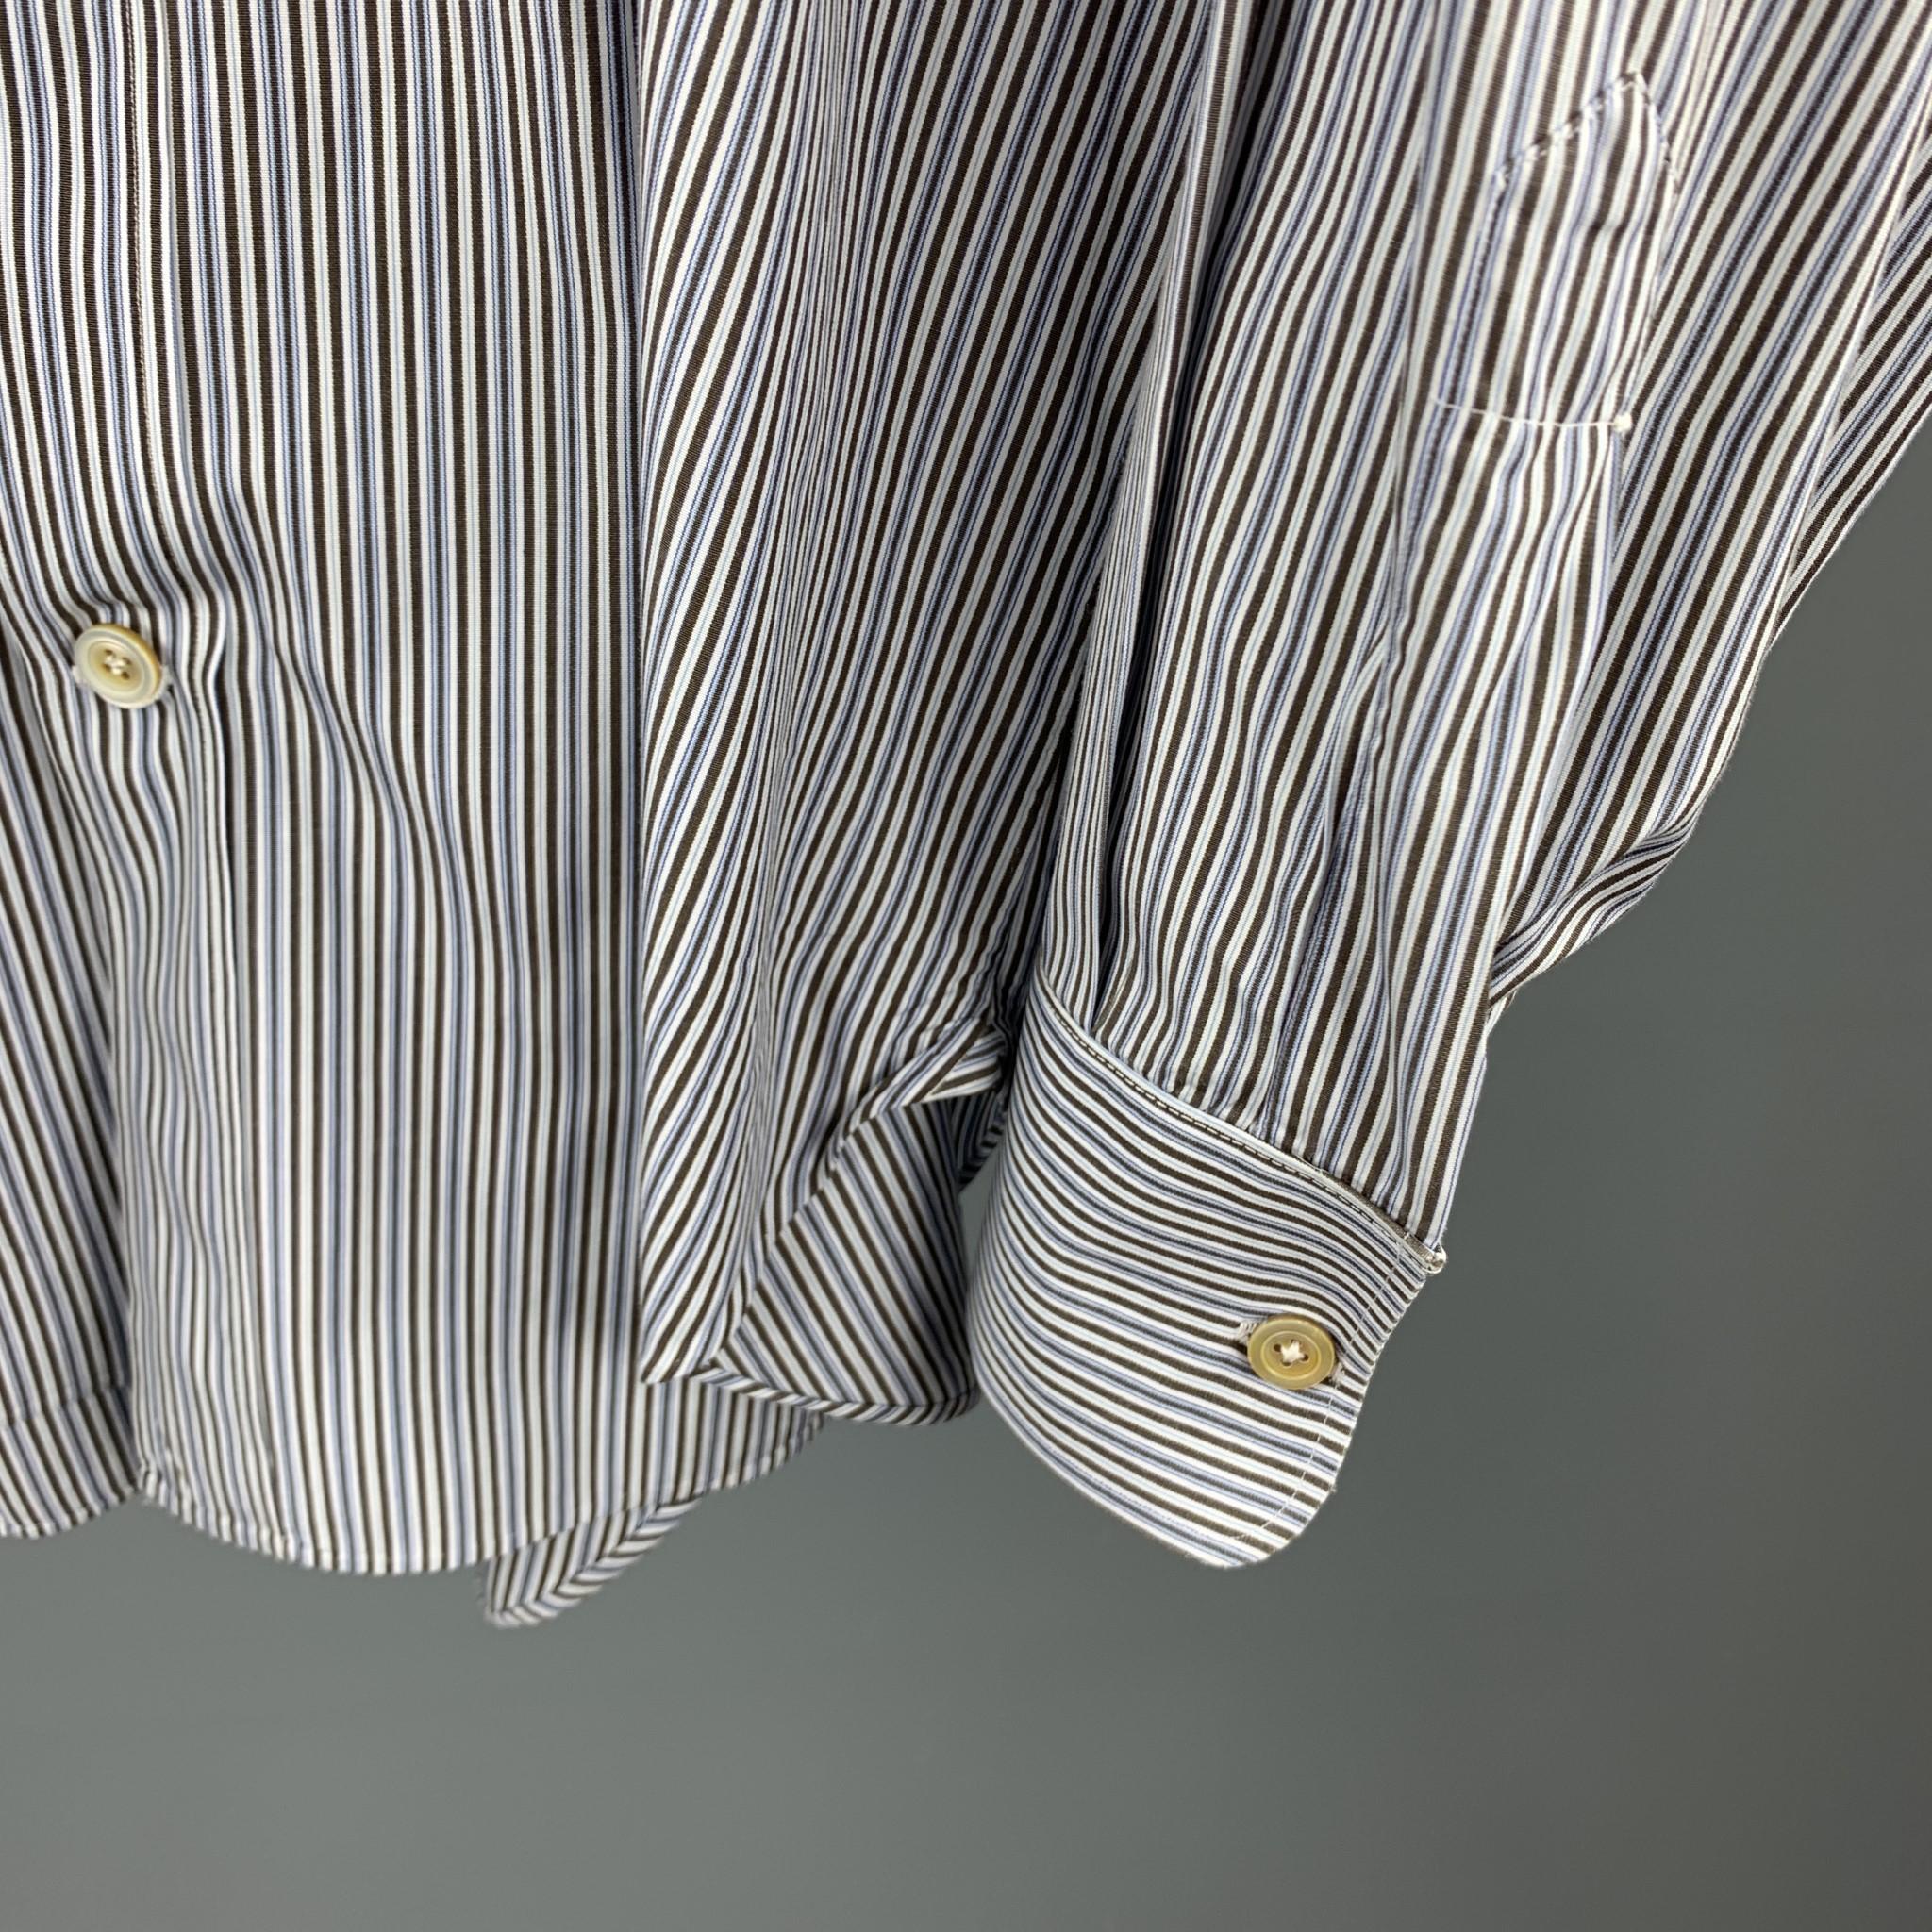 KITON long sleeve shirt comes in a brown & blue stripe cotton featuring a button up style and a spread collar. Made in Italy.

Excellent Pre-Owned Condition.
Marked: 15.5/39 

Measurements:

Shoulder: 16.5 in. 
Chest: 42 in. 
Sleeve: 25.5 in.